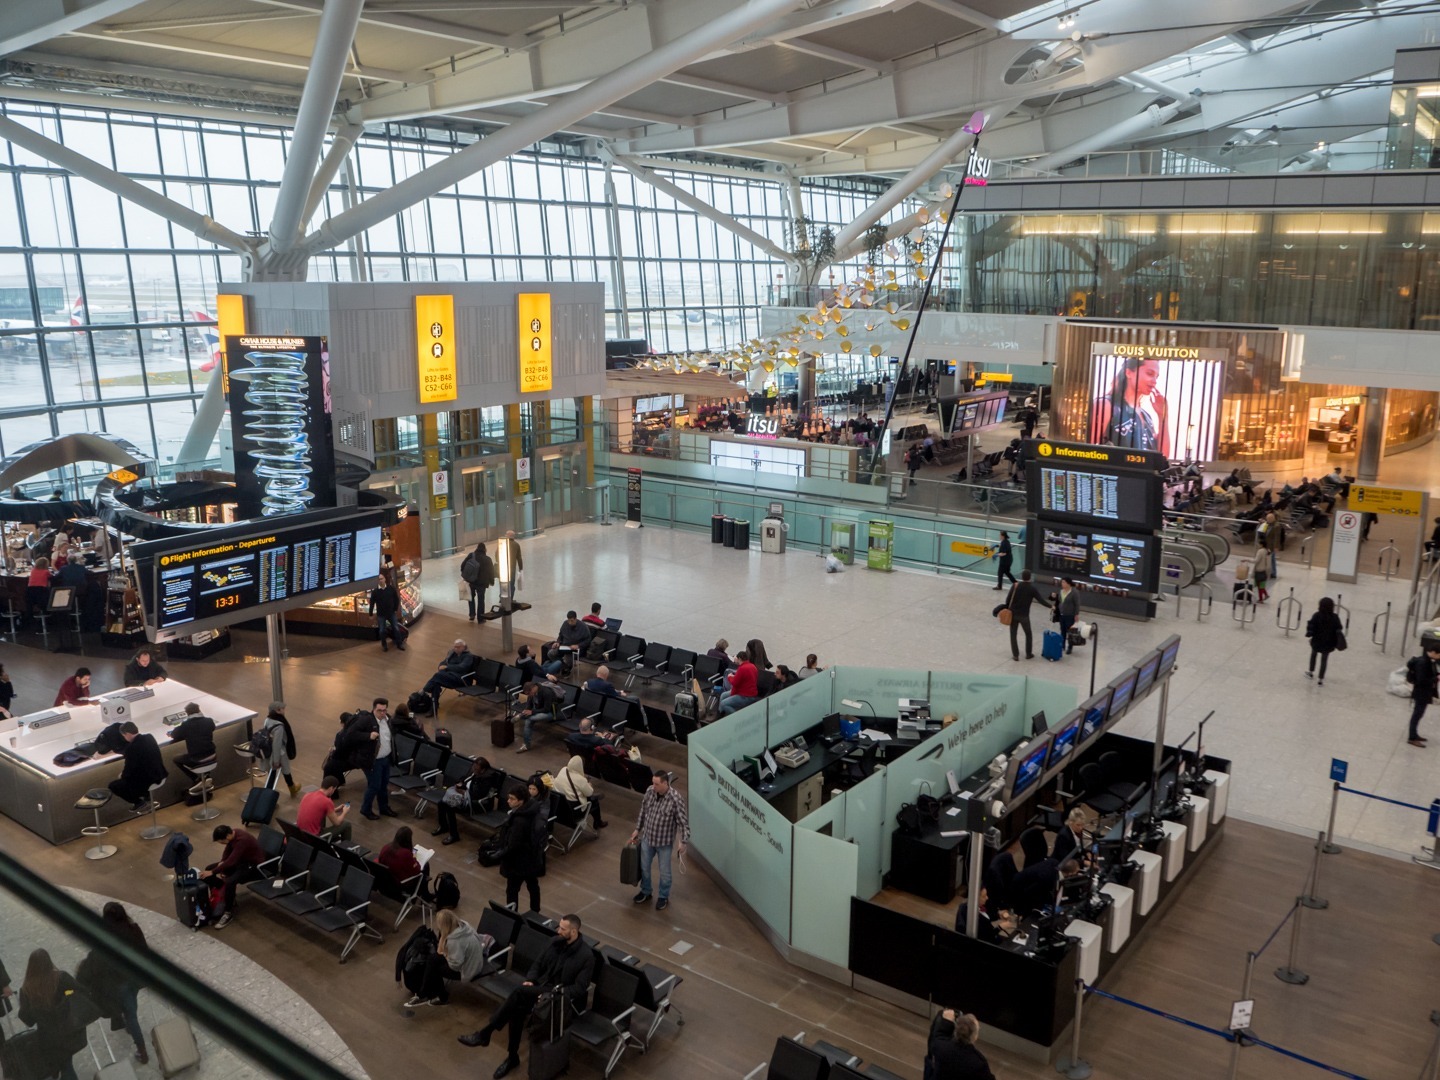 Heathrow Aiport Guide - 10 Things to Know Before Visiting London Heathrow Airport